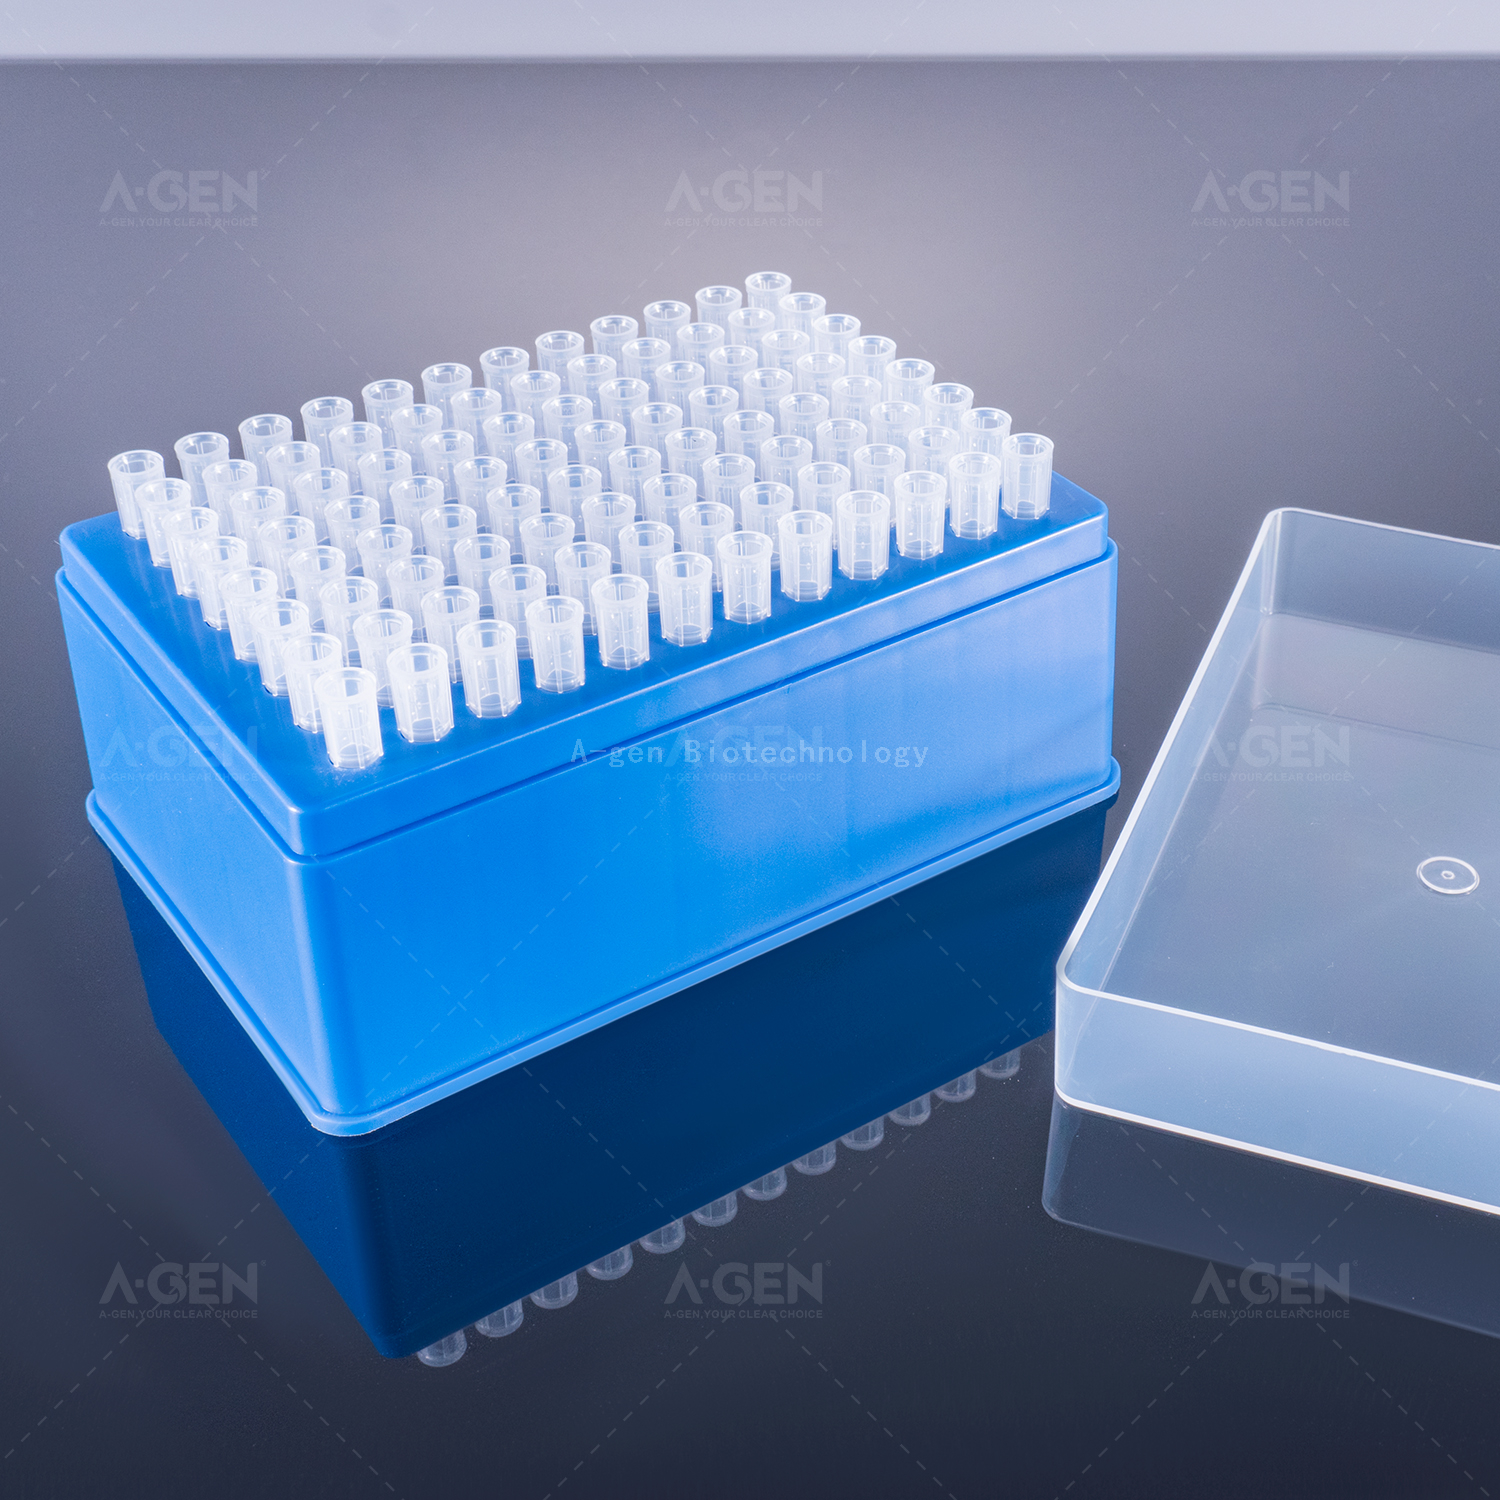 Nayo Tip 250μL Clear Robotic PP Pipette Tip (Racked,sterilized) for Liquid Transfer No Filter FX-250-RSL Low Residual